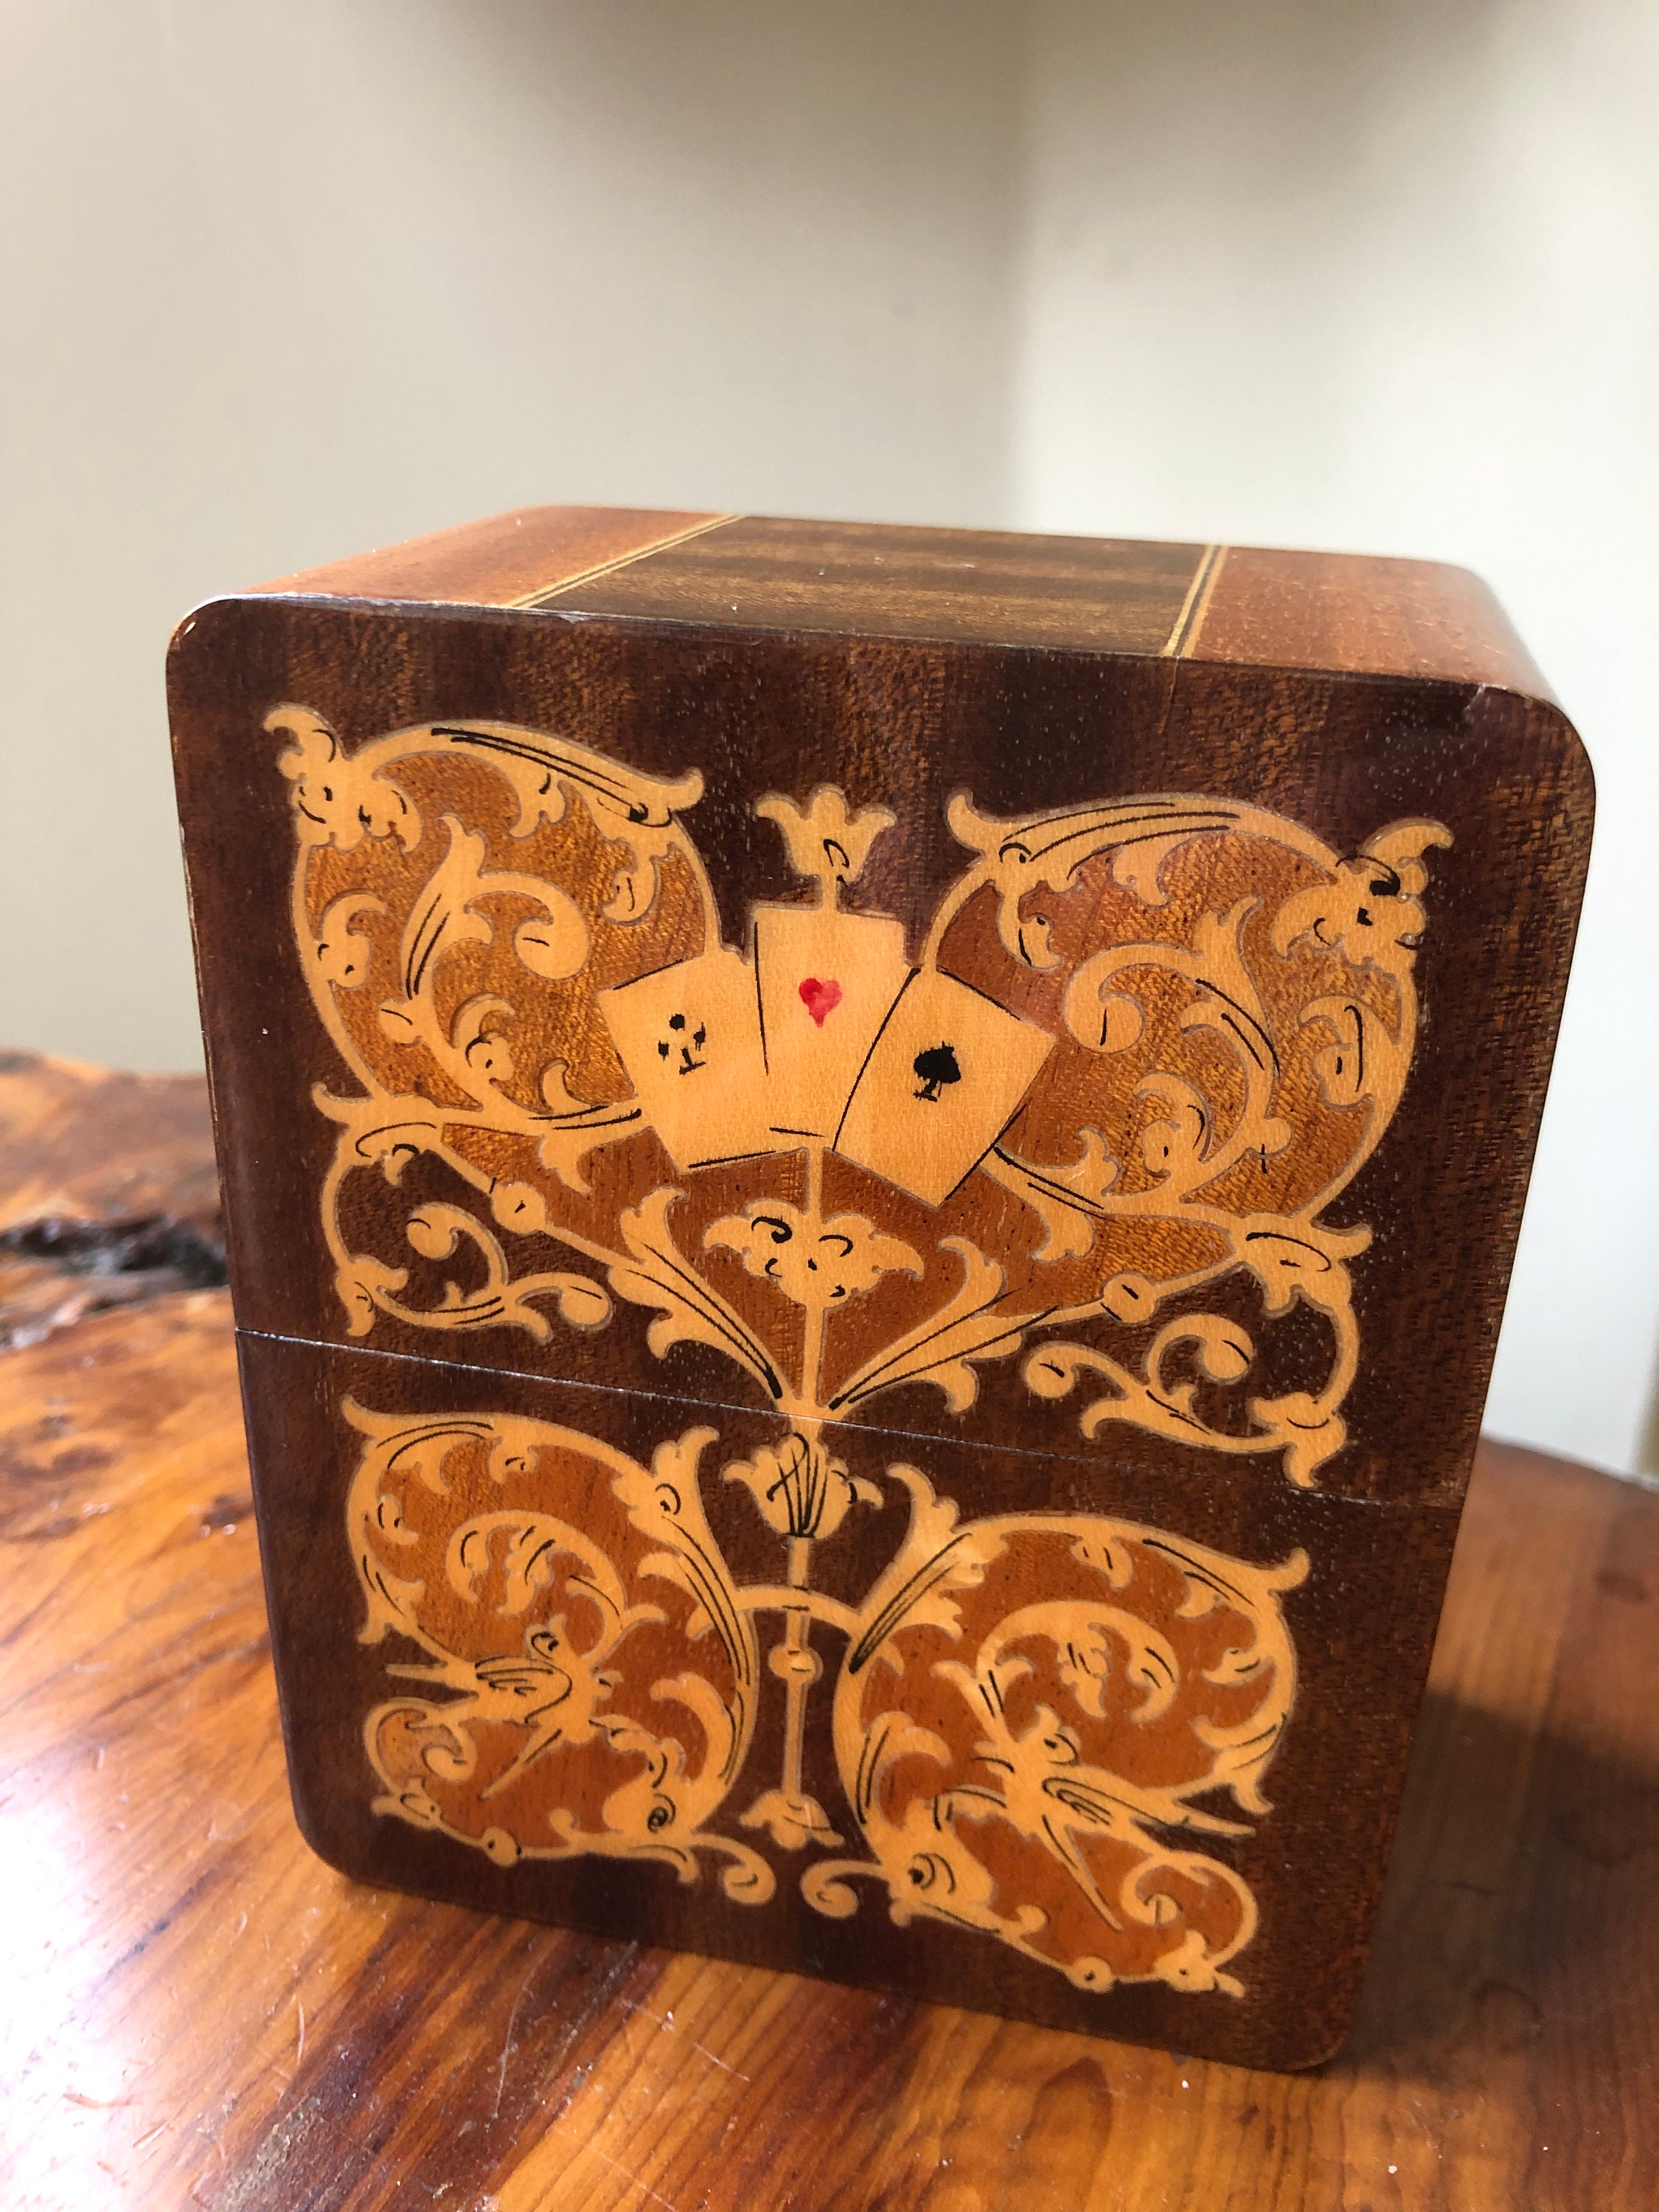 Inlaided card box + playing cards - Sorrento inlaid wood